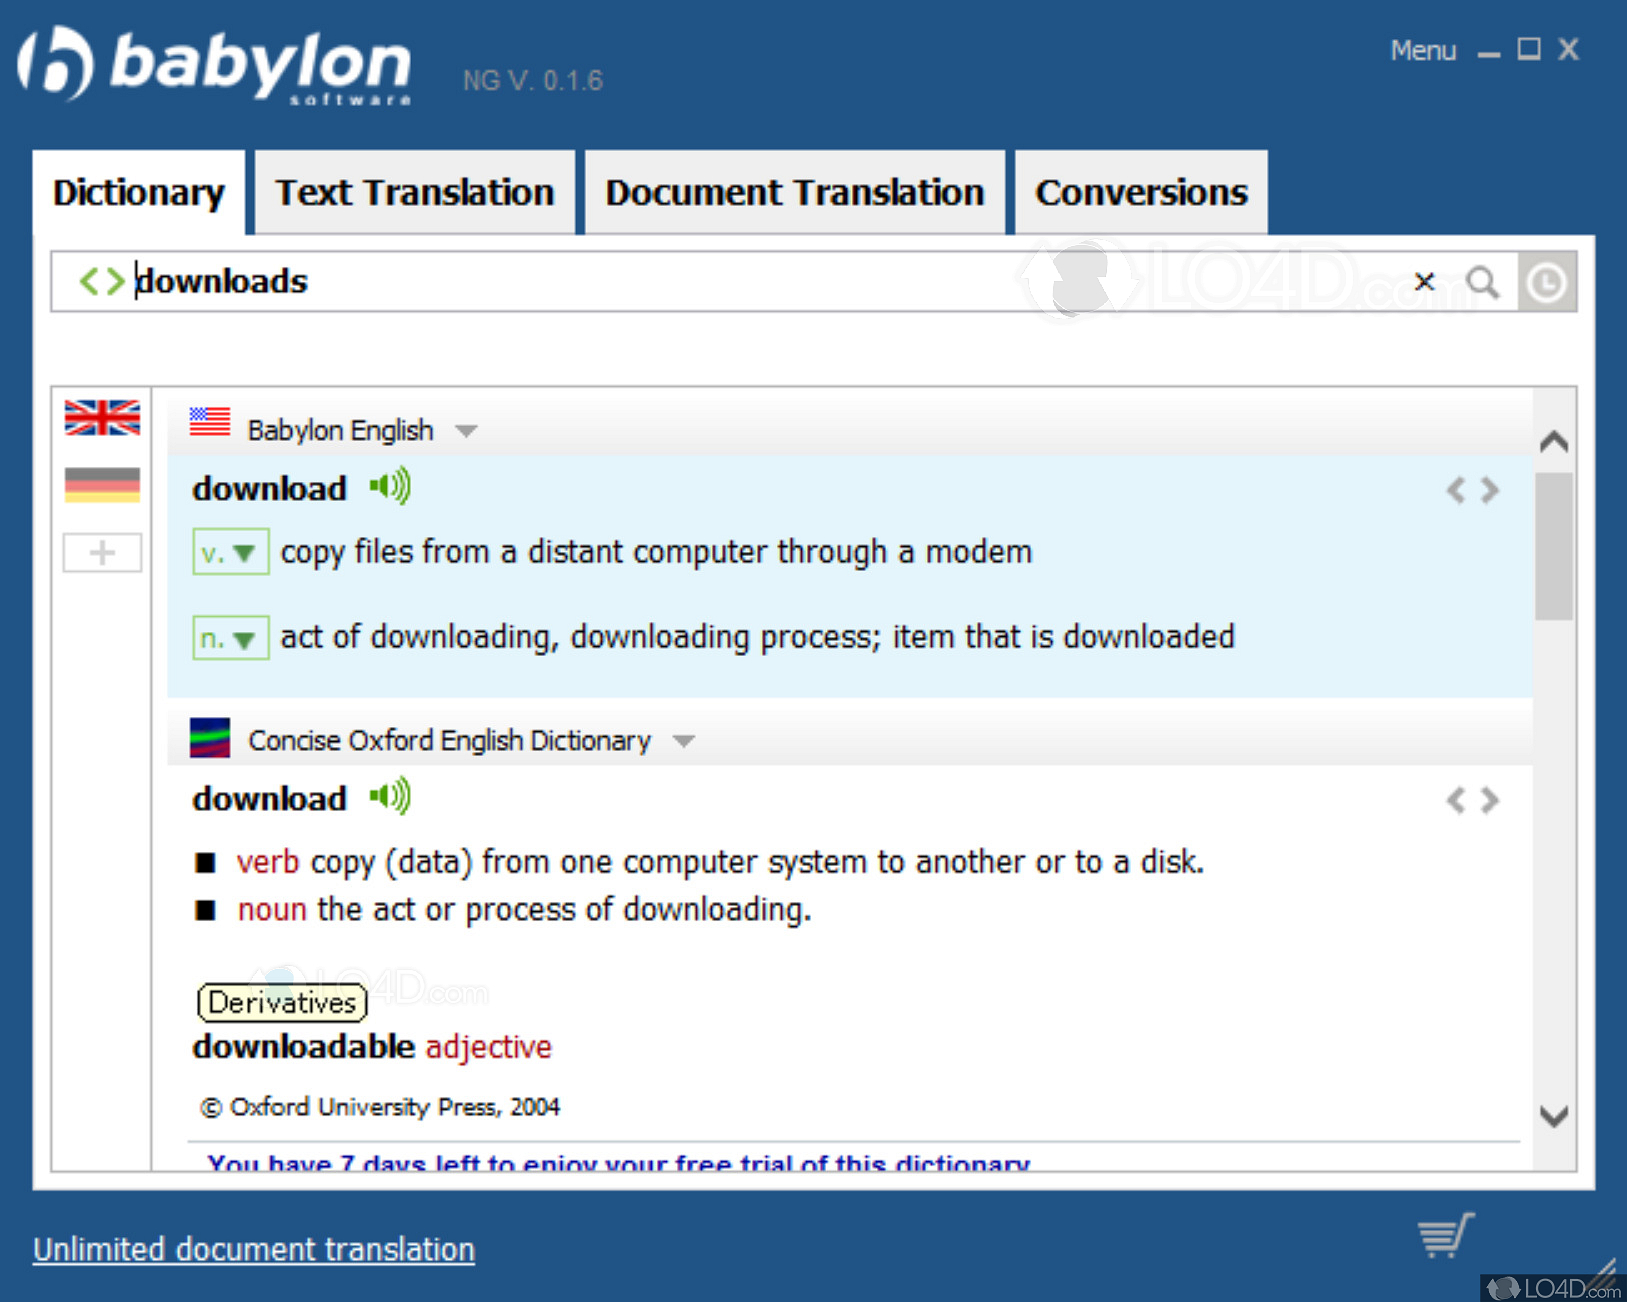 babylon dictionary free download